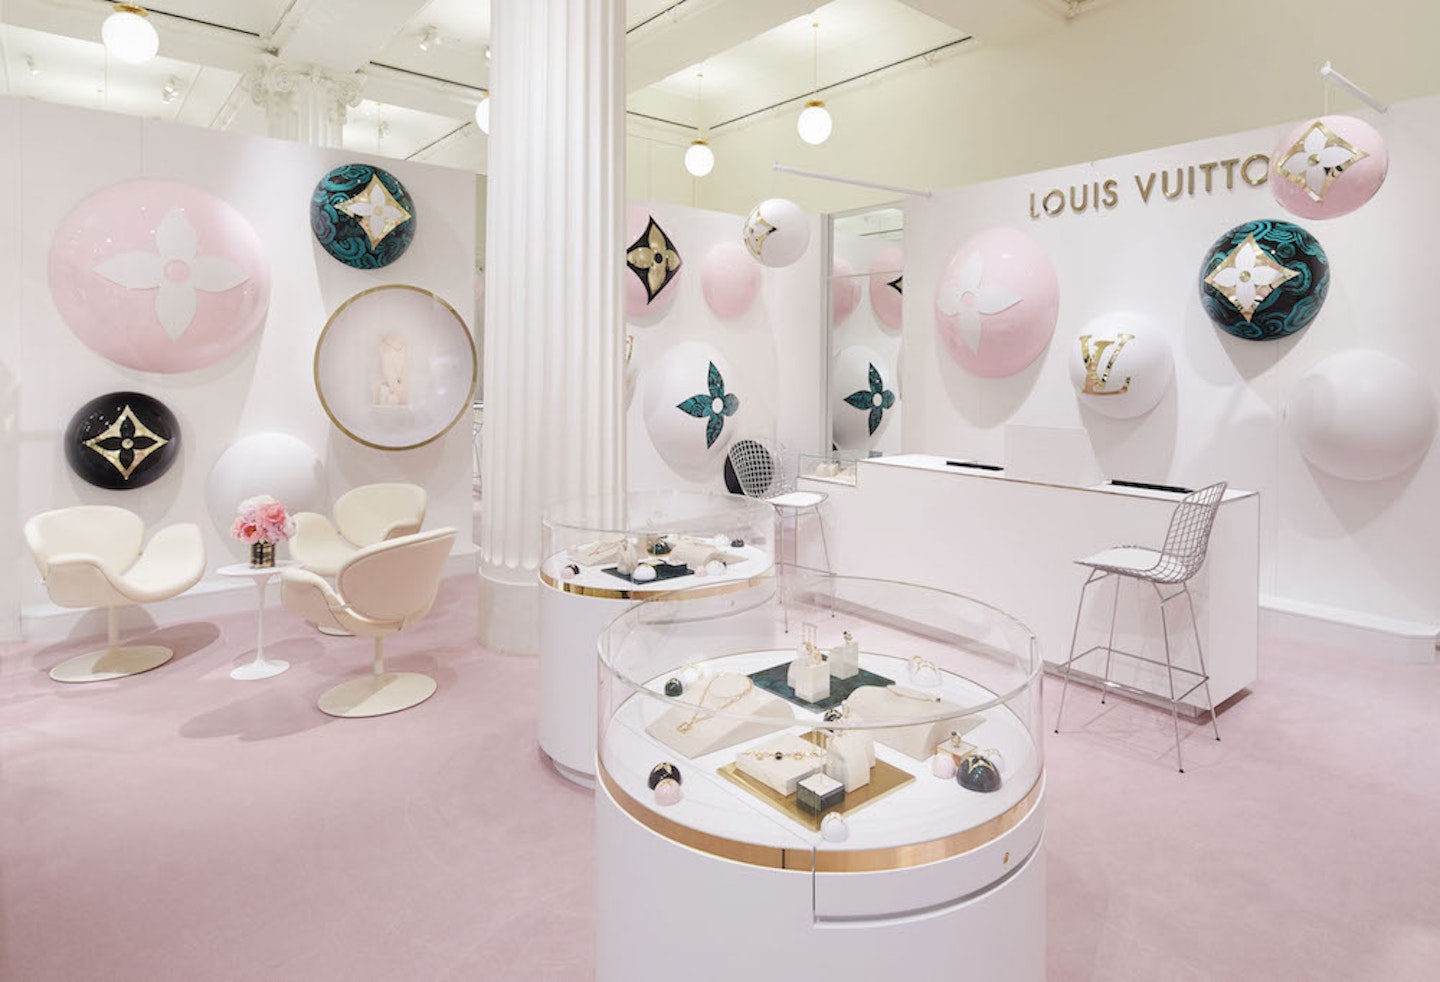 This New Louis Vuitton Jewellery Collection Is As Good As The Brand's Bags